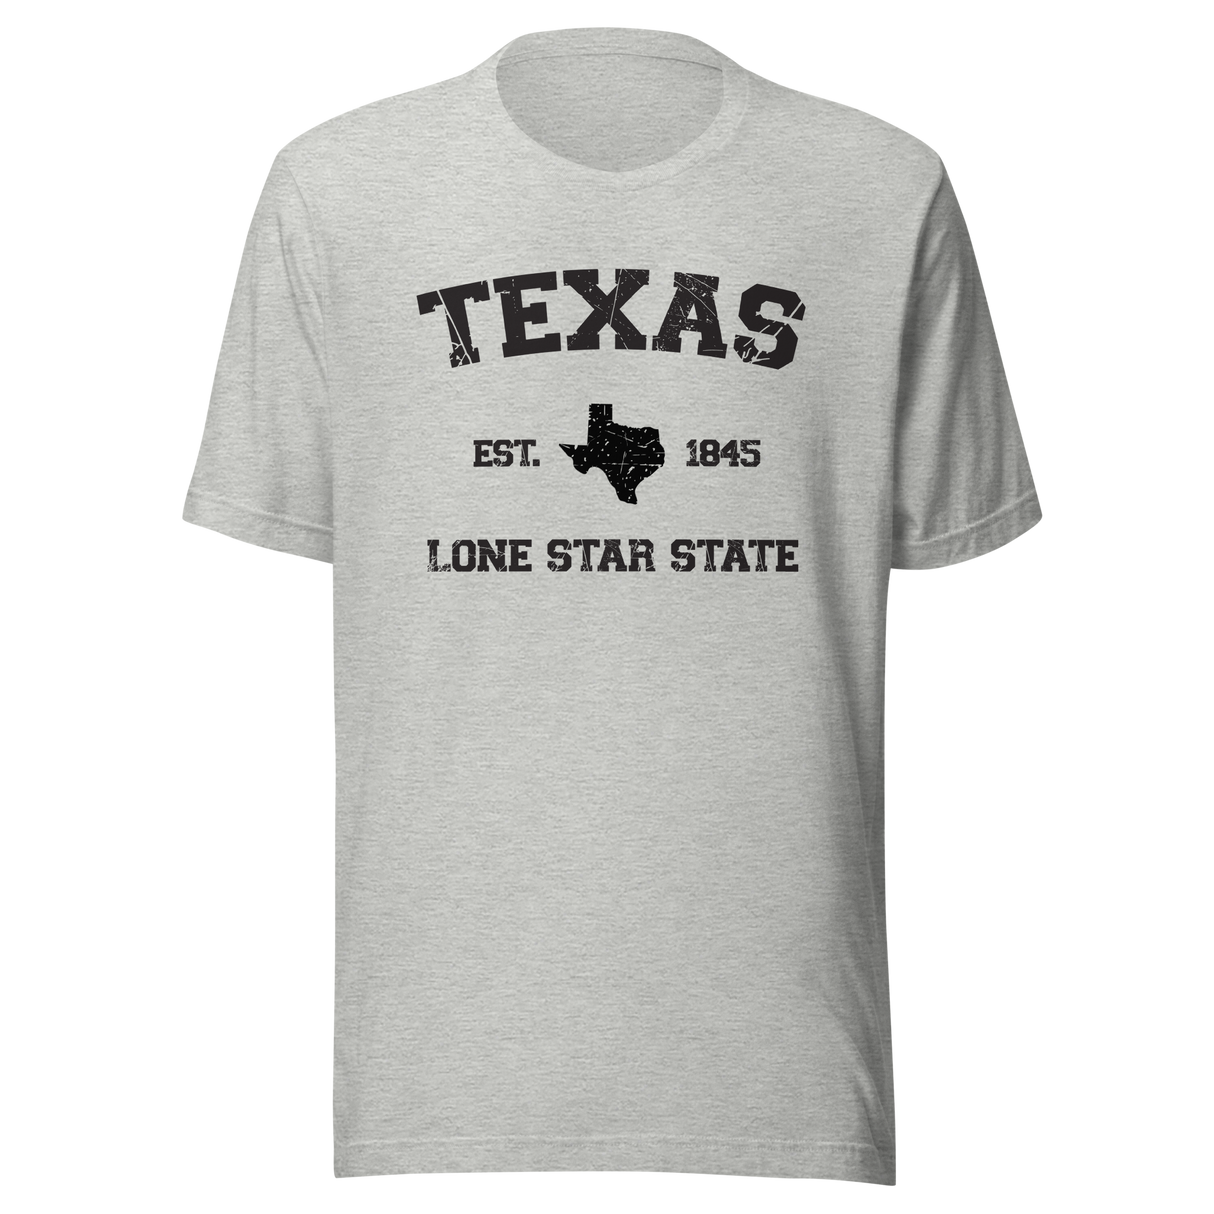 texas-est-1845-lone-star-state-texas-tee-1845-t-shirt-lone-star-tee-t-shirt-tee#color_athletic-heather